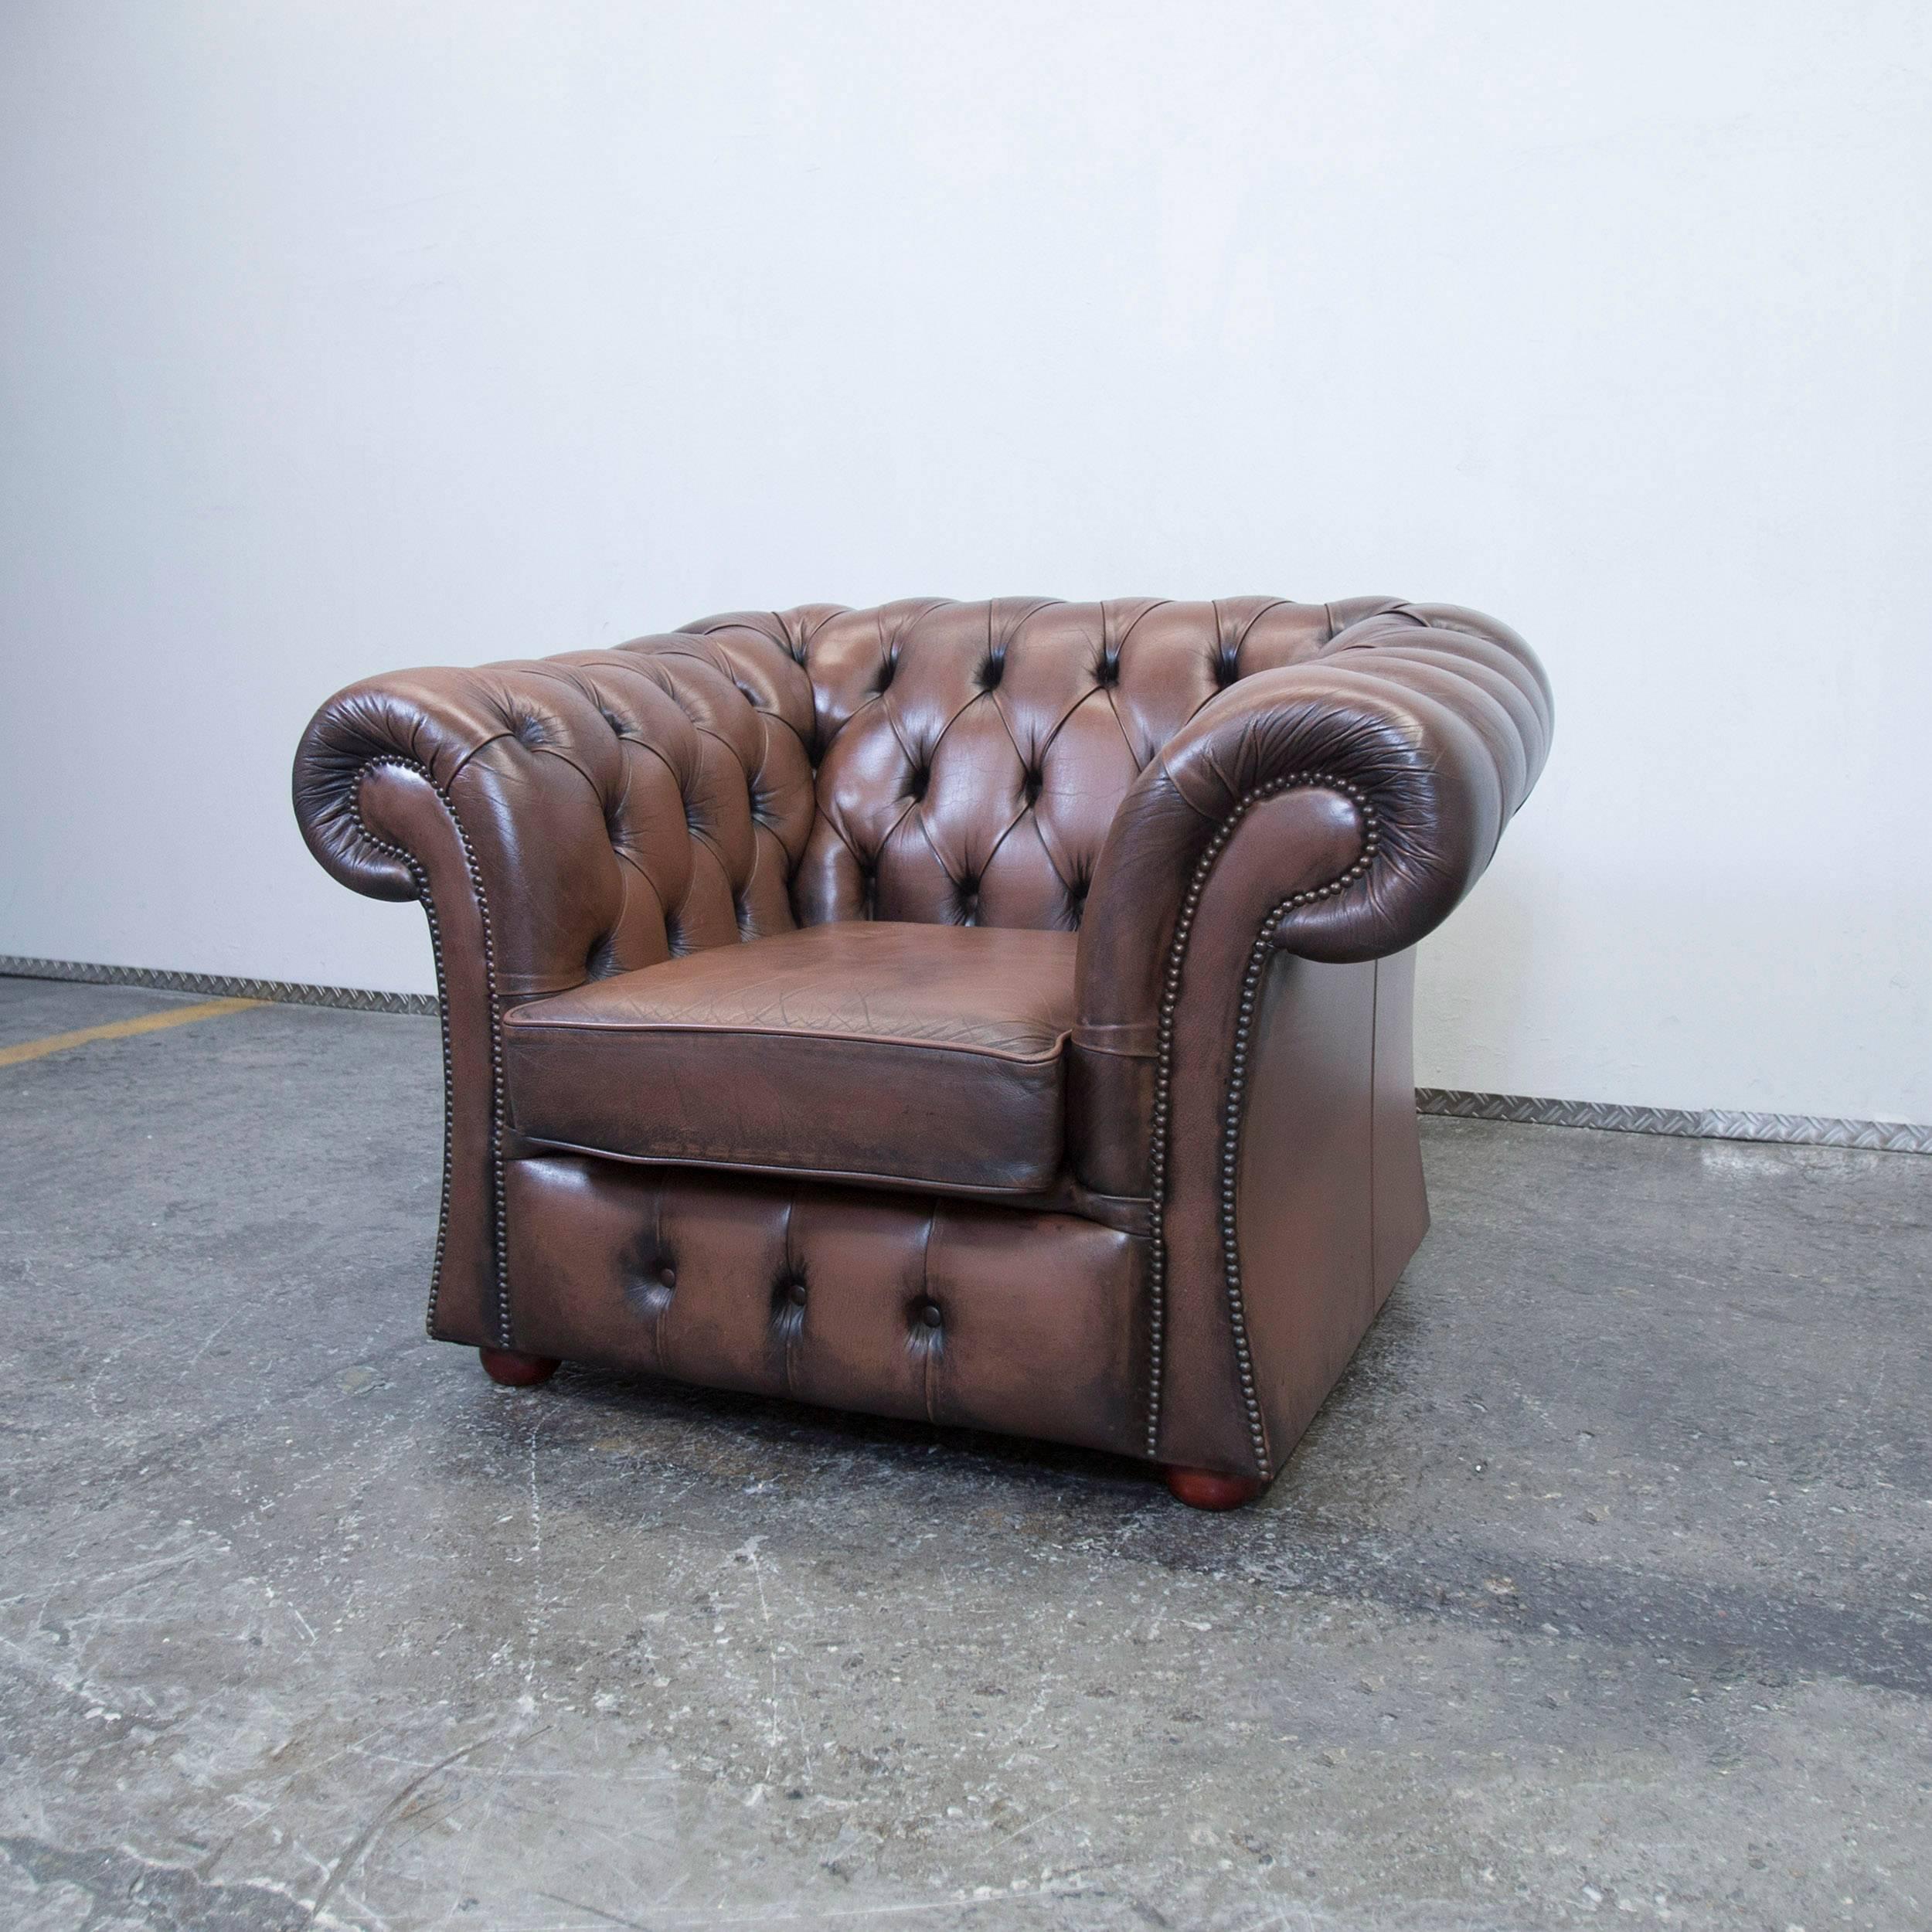 British Chesterfield Leather Armchair Brown Oneseater Chair Vintage Retro